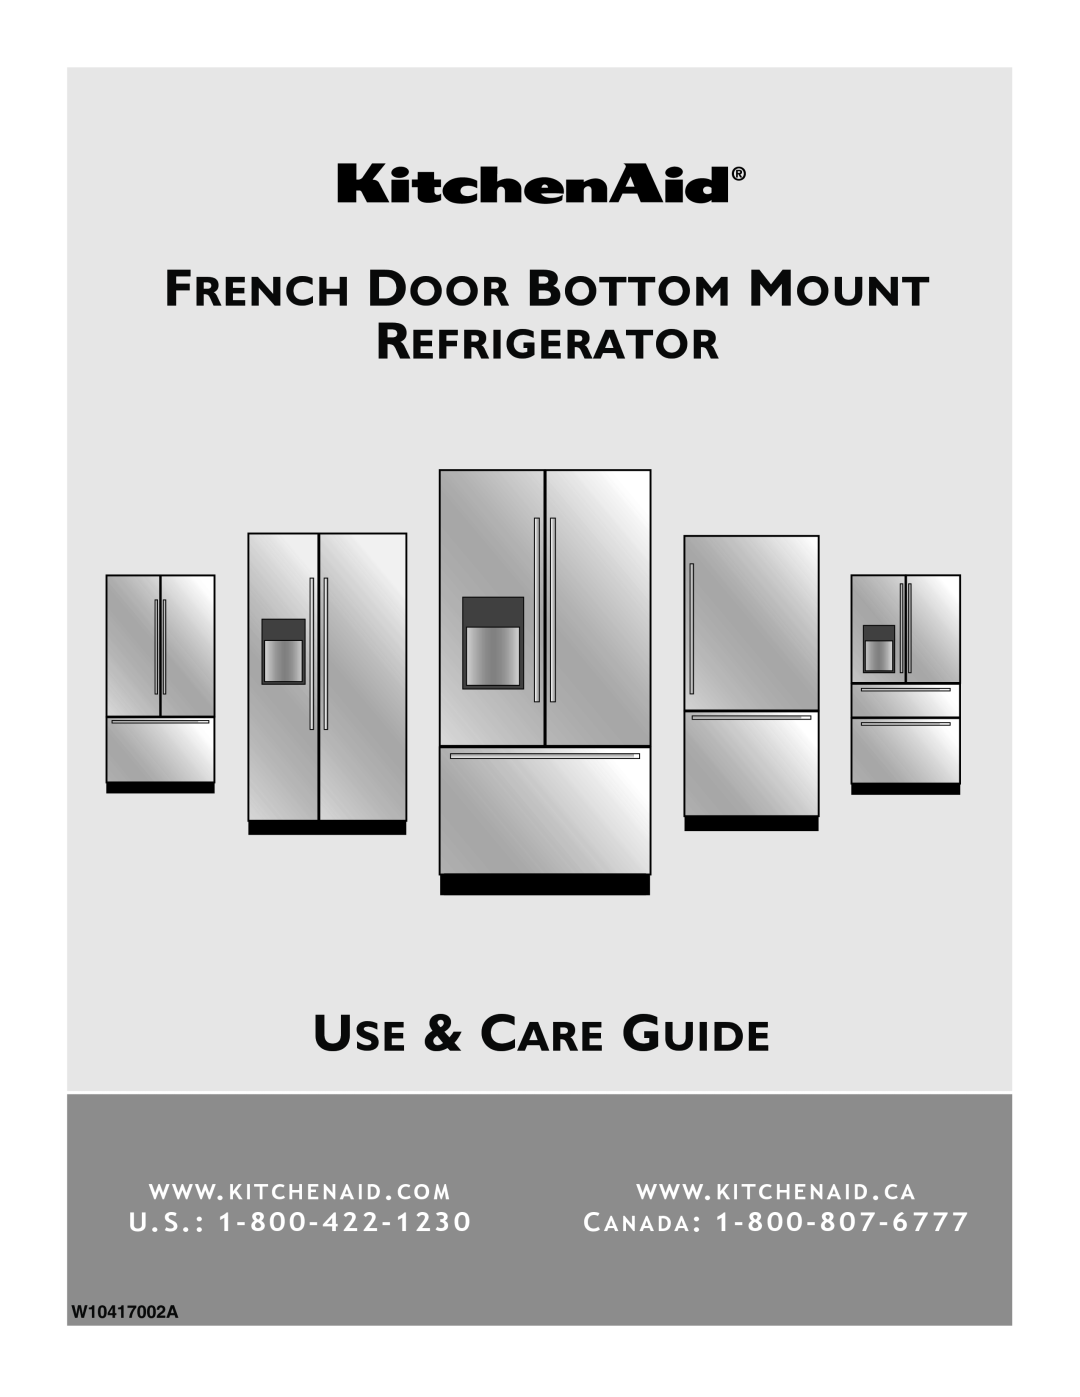 KitchenAid W10417002A manual French Door Bottom Mount Refrigerator Use & Care Guide, Ca N A D A 